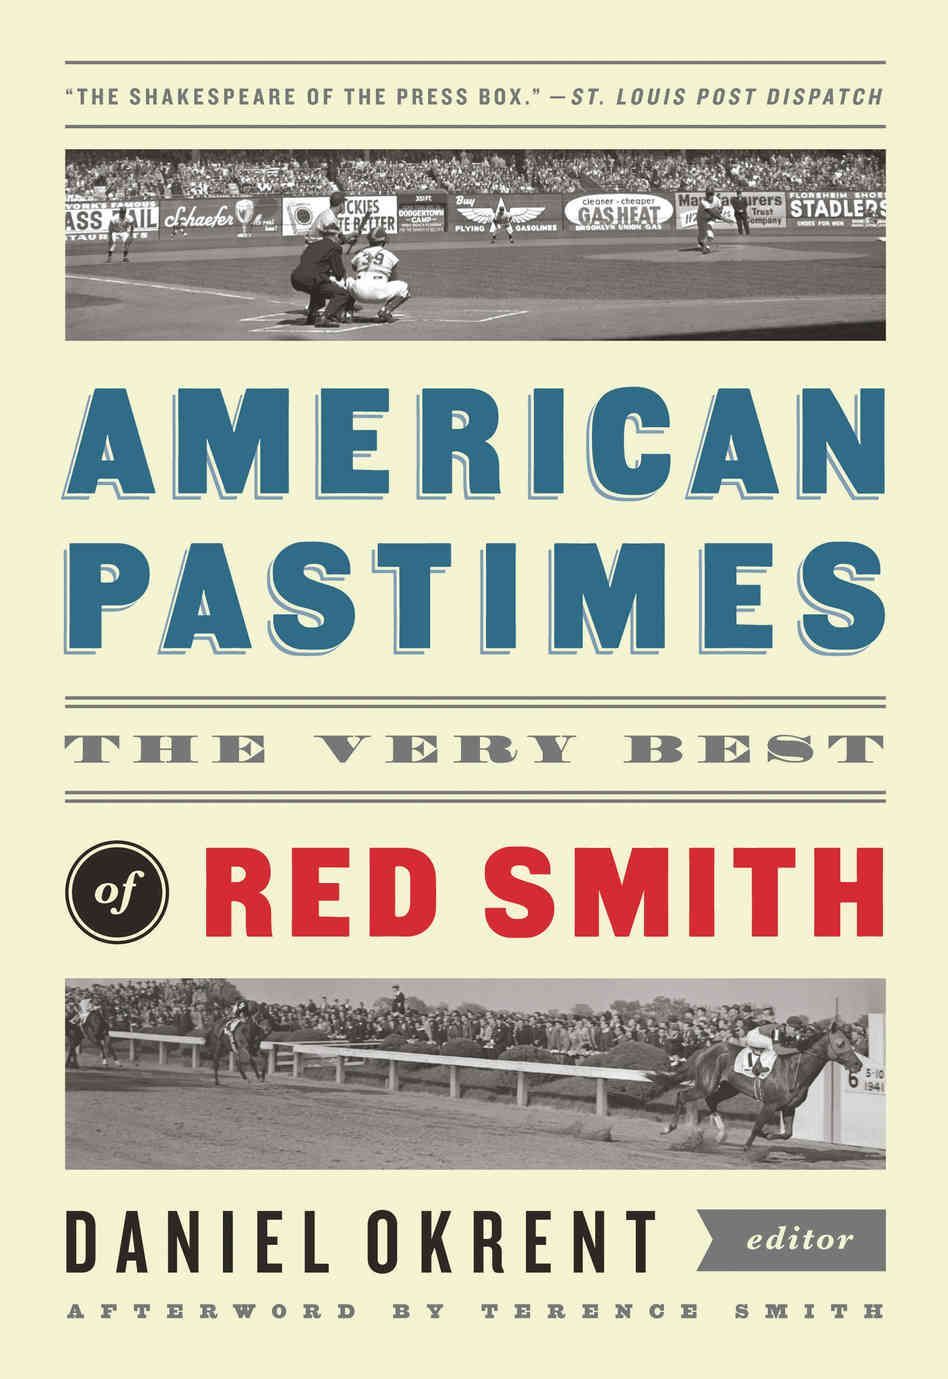 You Had to Like It: Rereading Red Smith